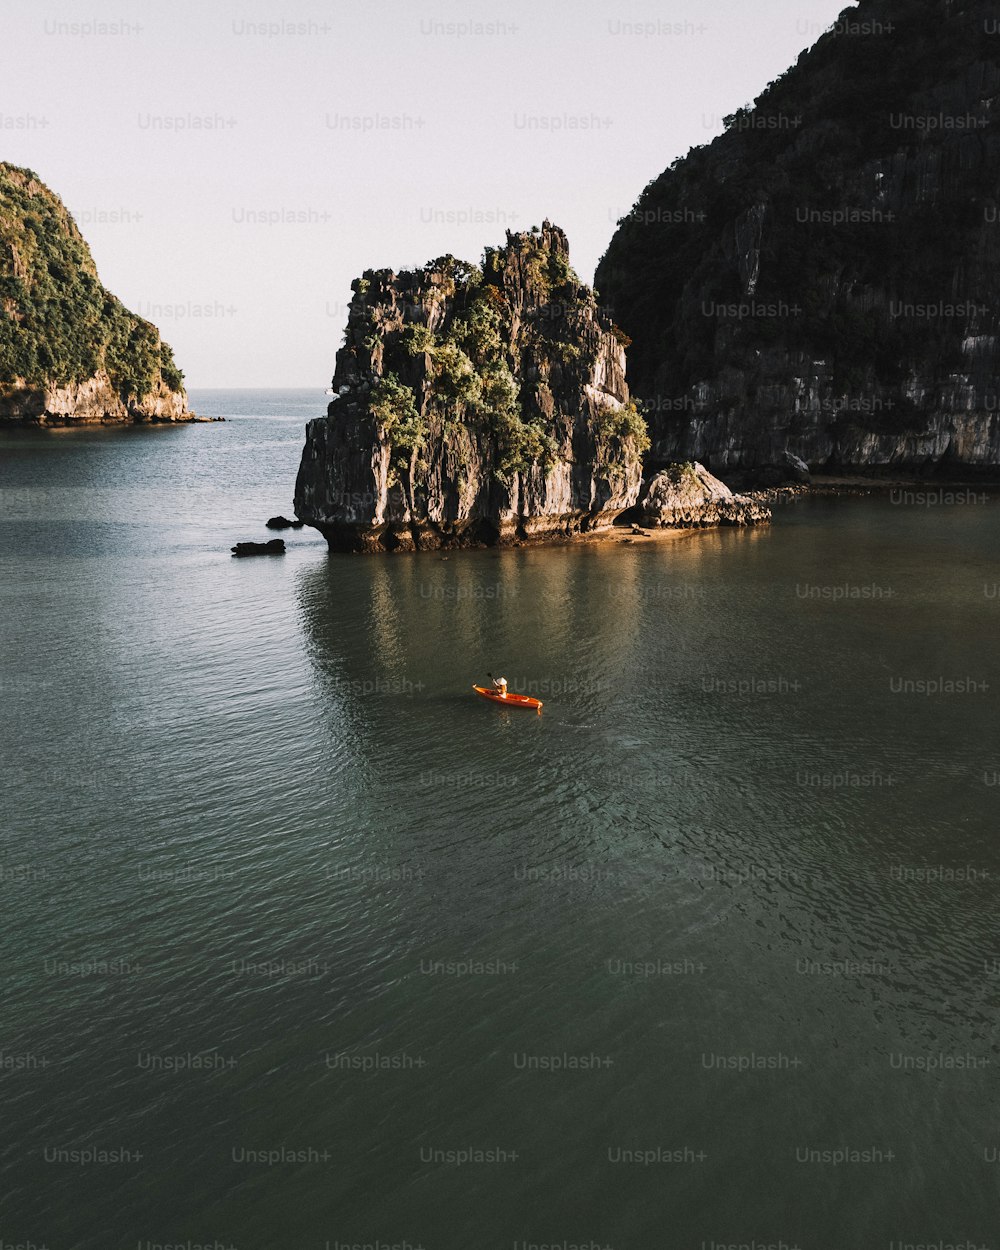 a person in a kayak in the middle of a body of water